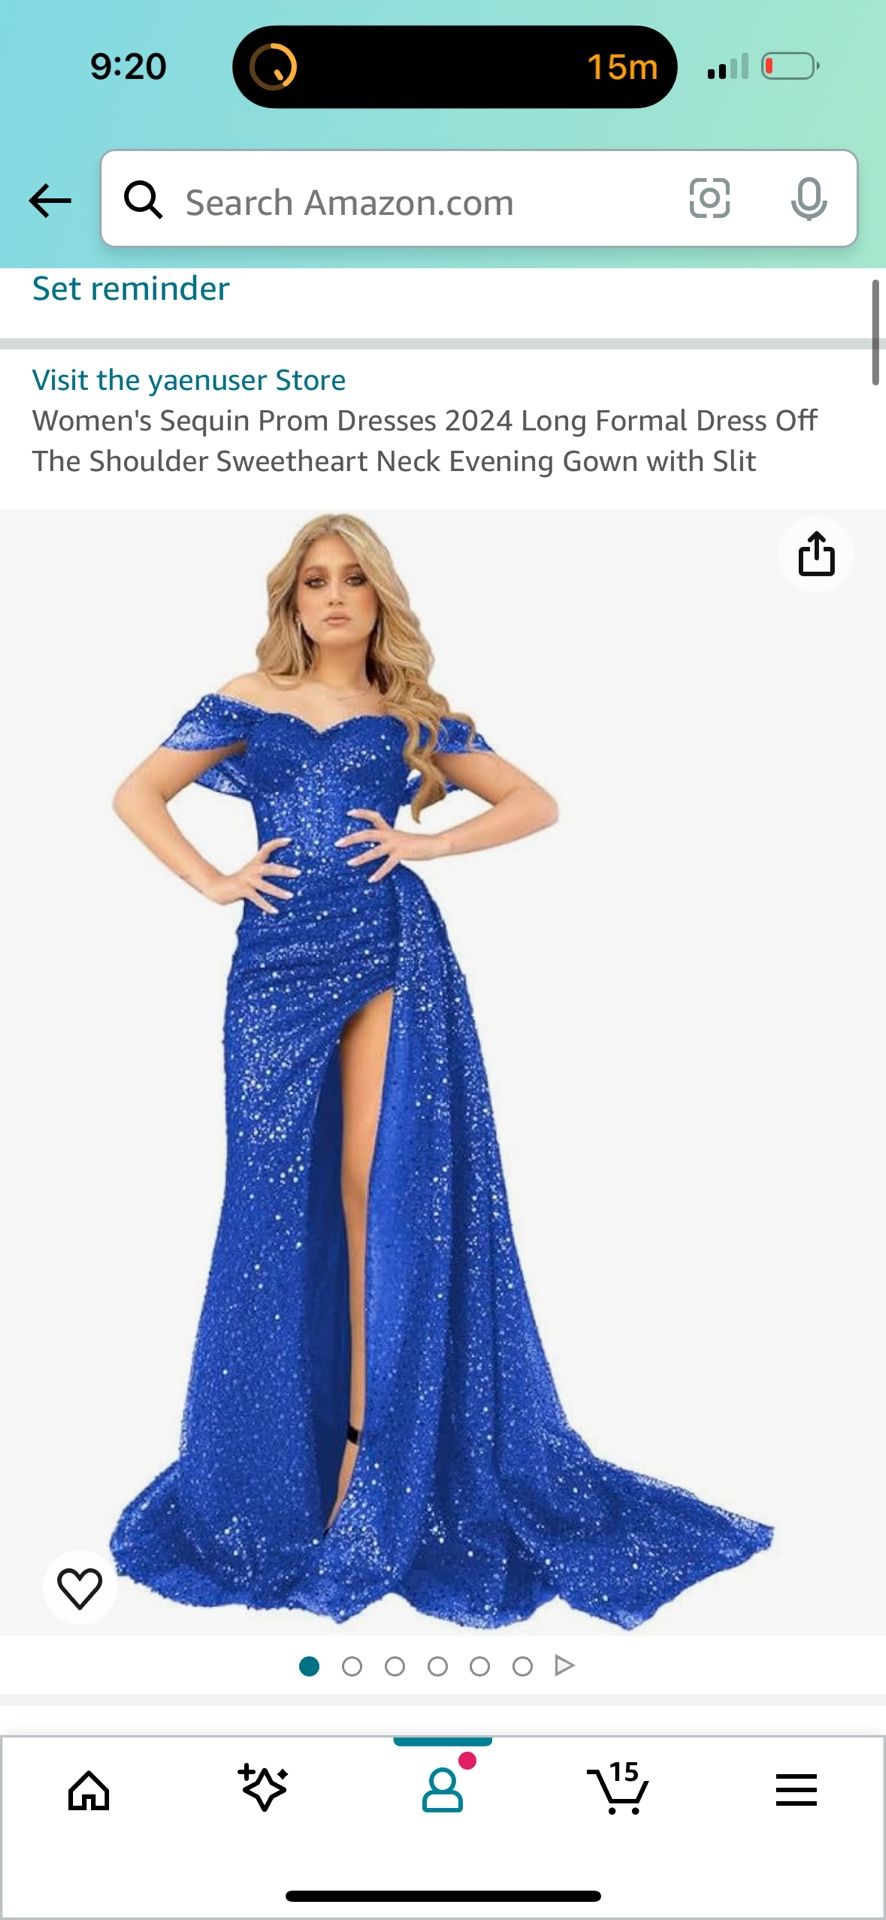 Brand New Royal Blue Gown 